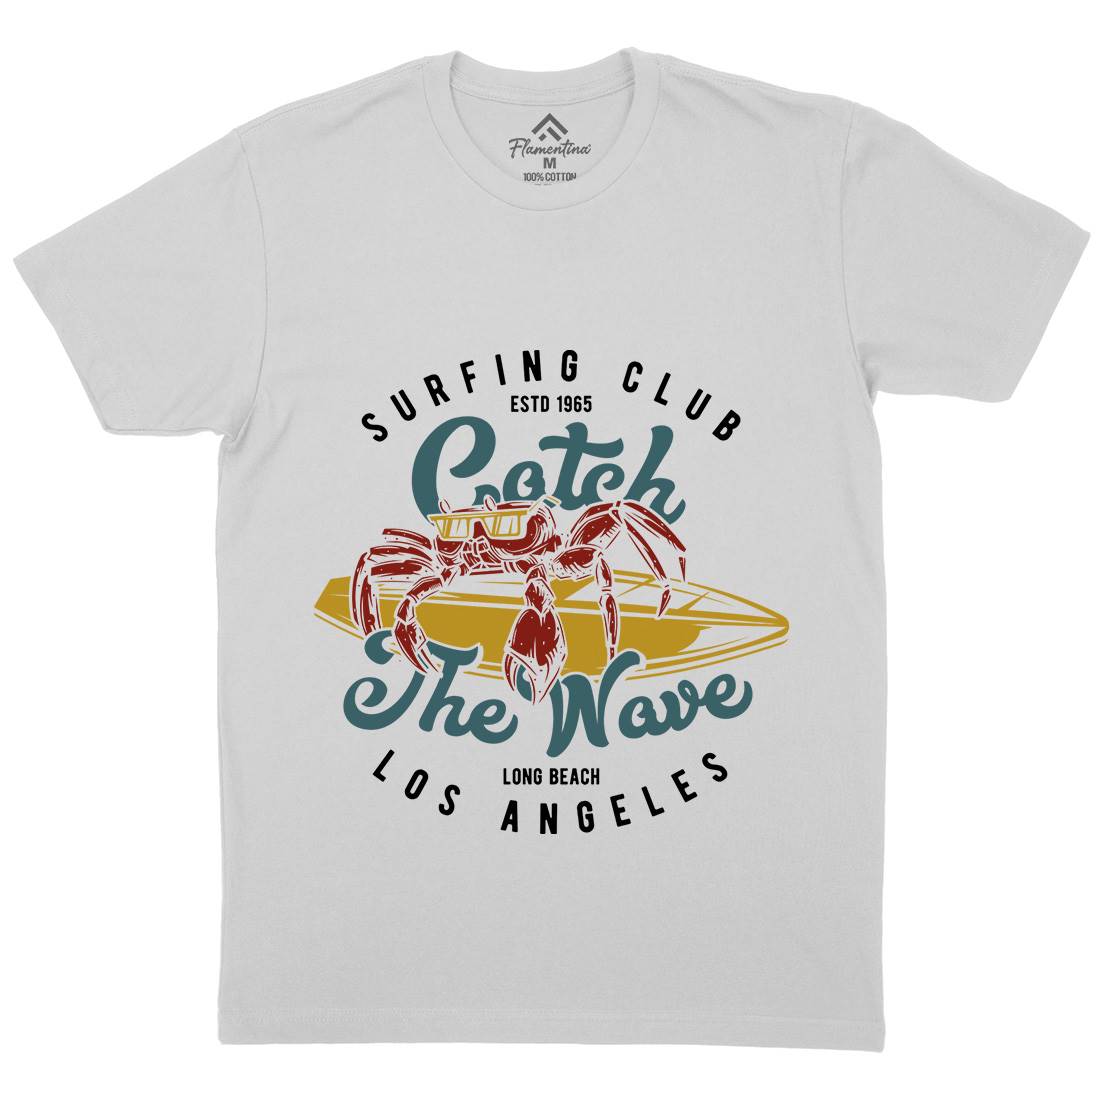 Catch The Wave Surfing Mens Crew Neck T-Shirt Surf B877